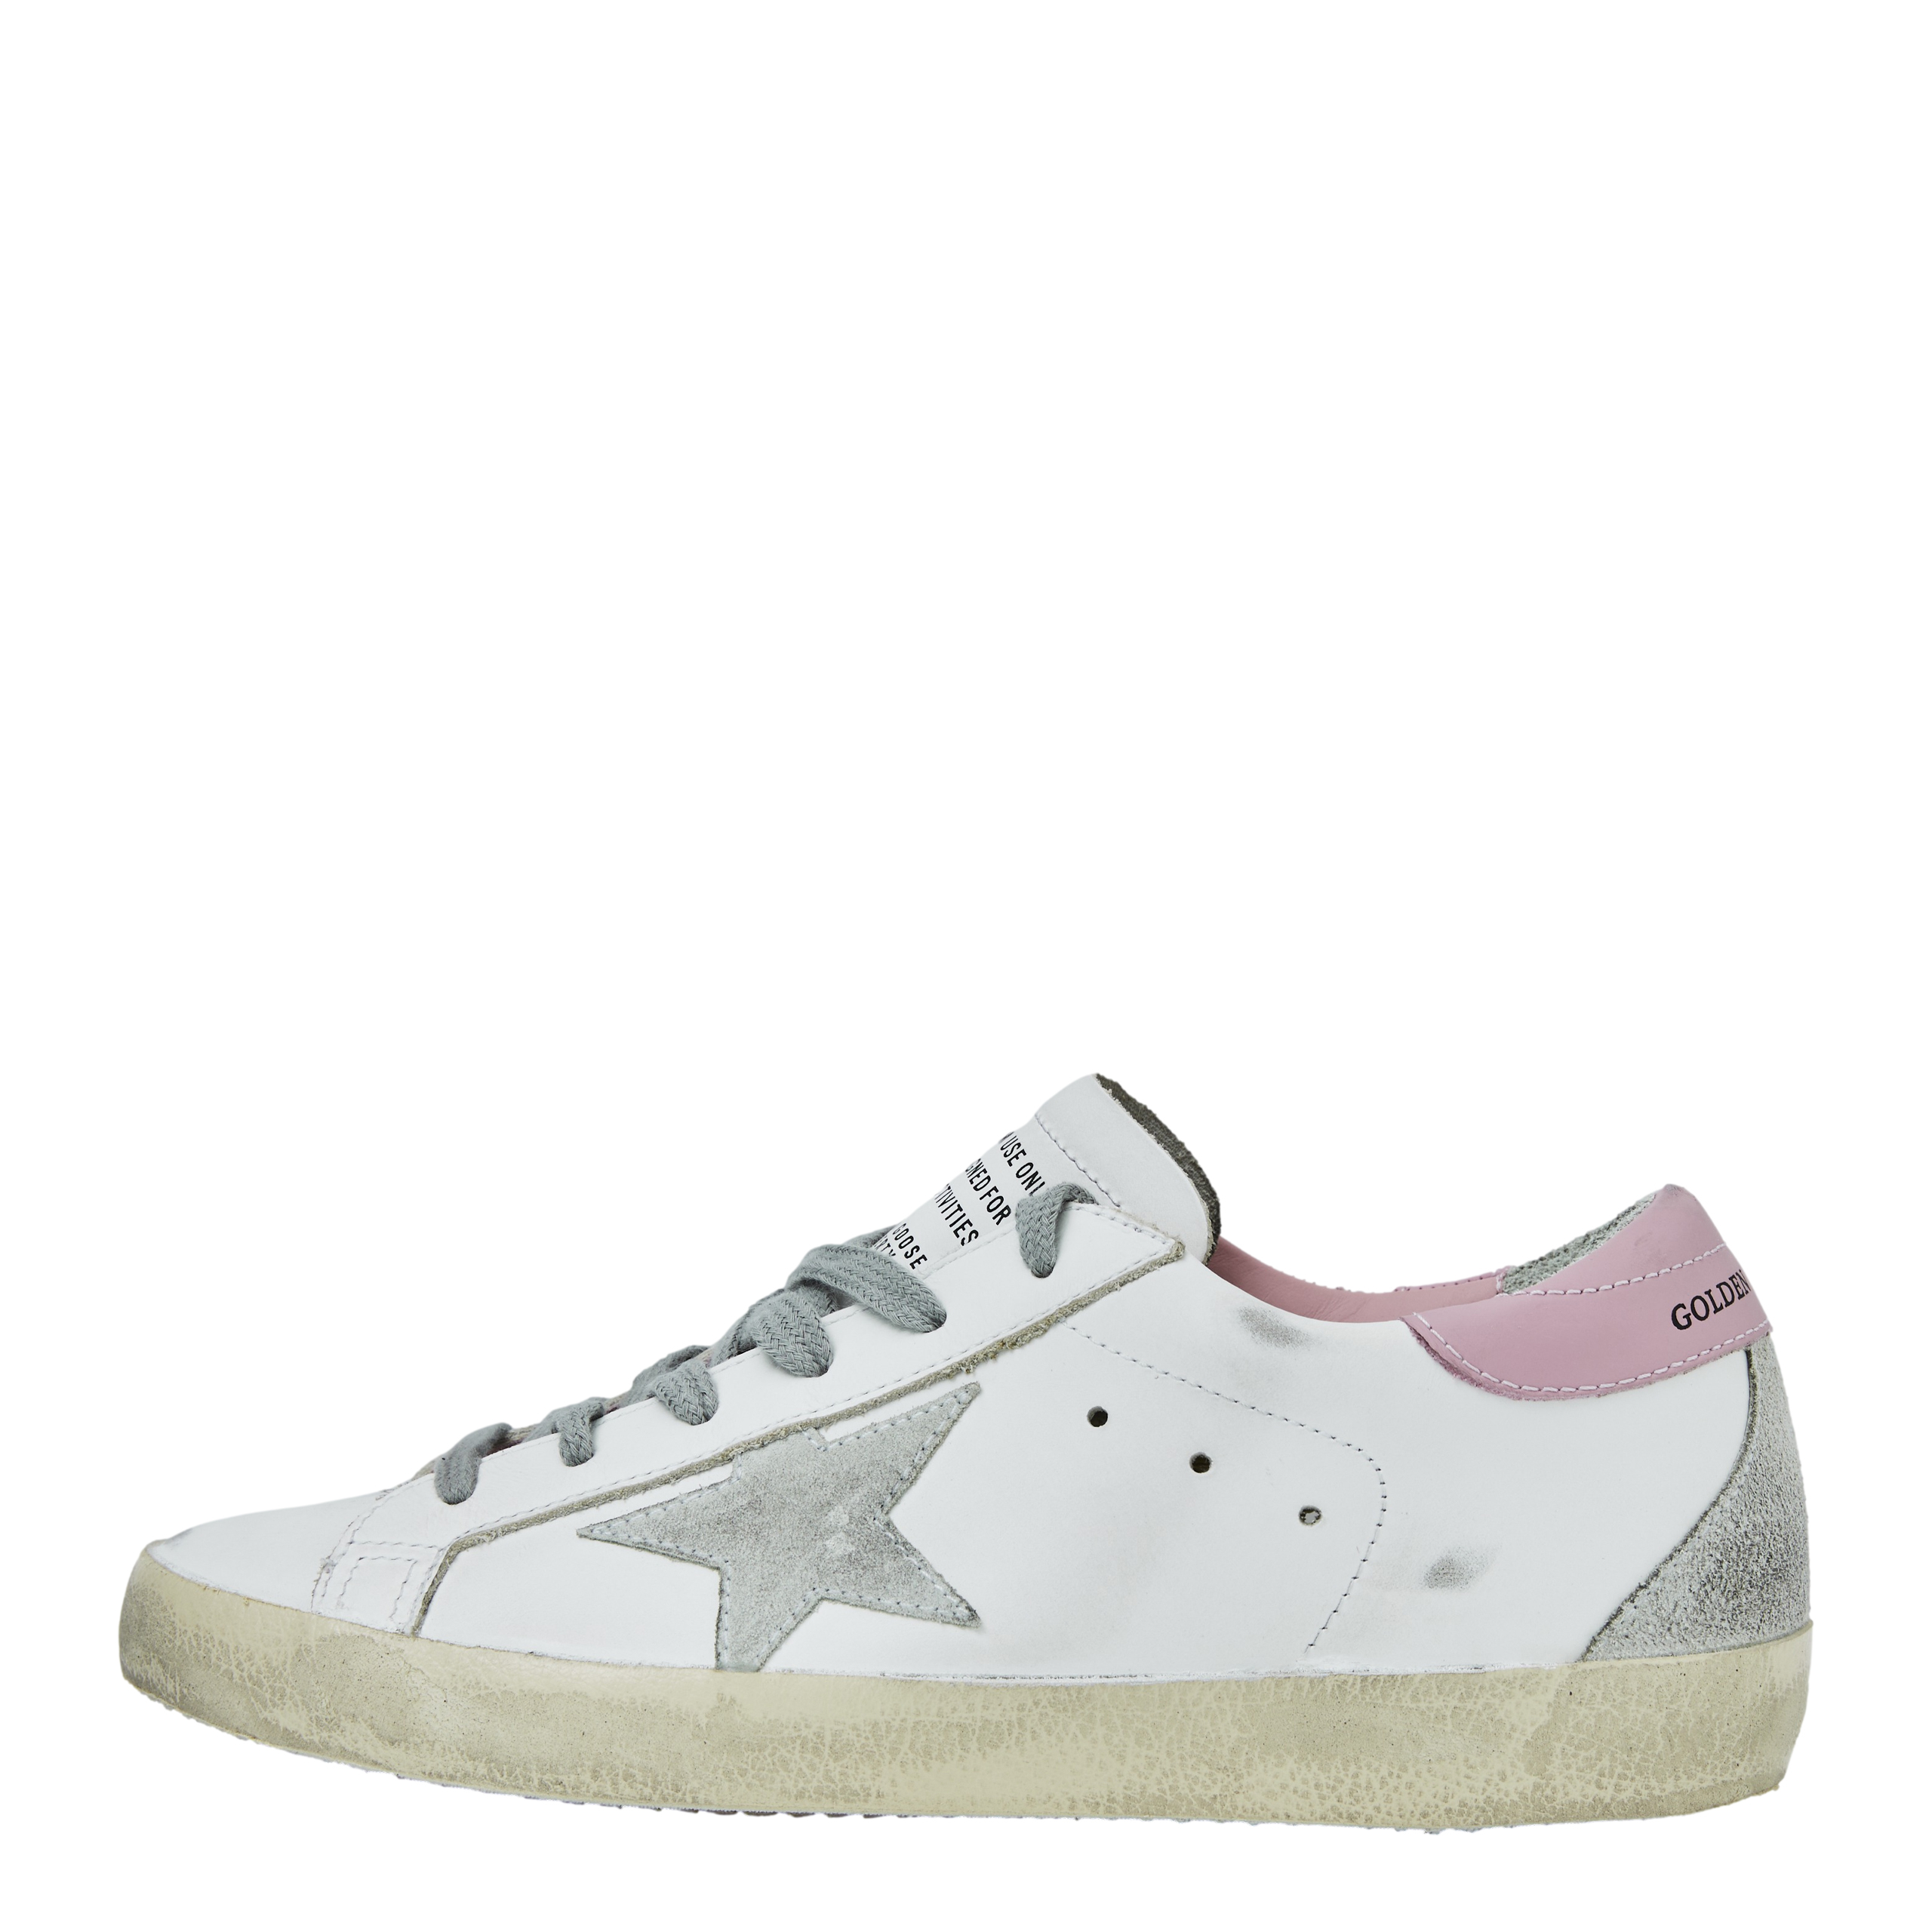 None Golden Goose Deluxe Brand GWF00102/F002569/10914, размер 38;41 GWF00102/F002569/10914 - фото 3